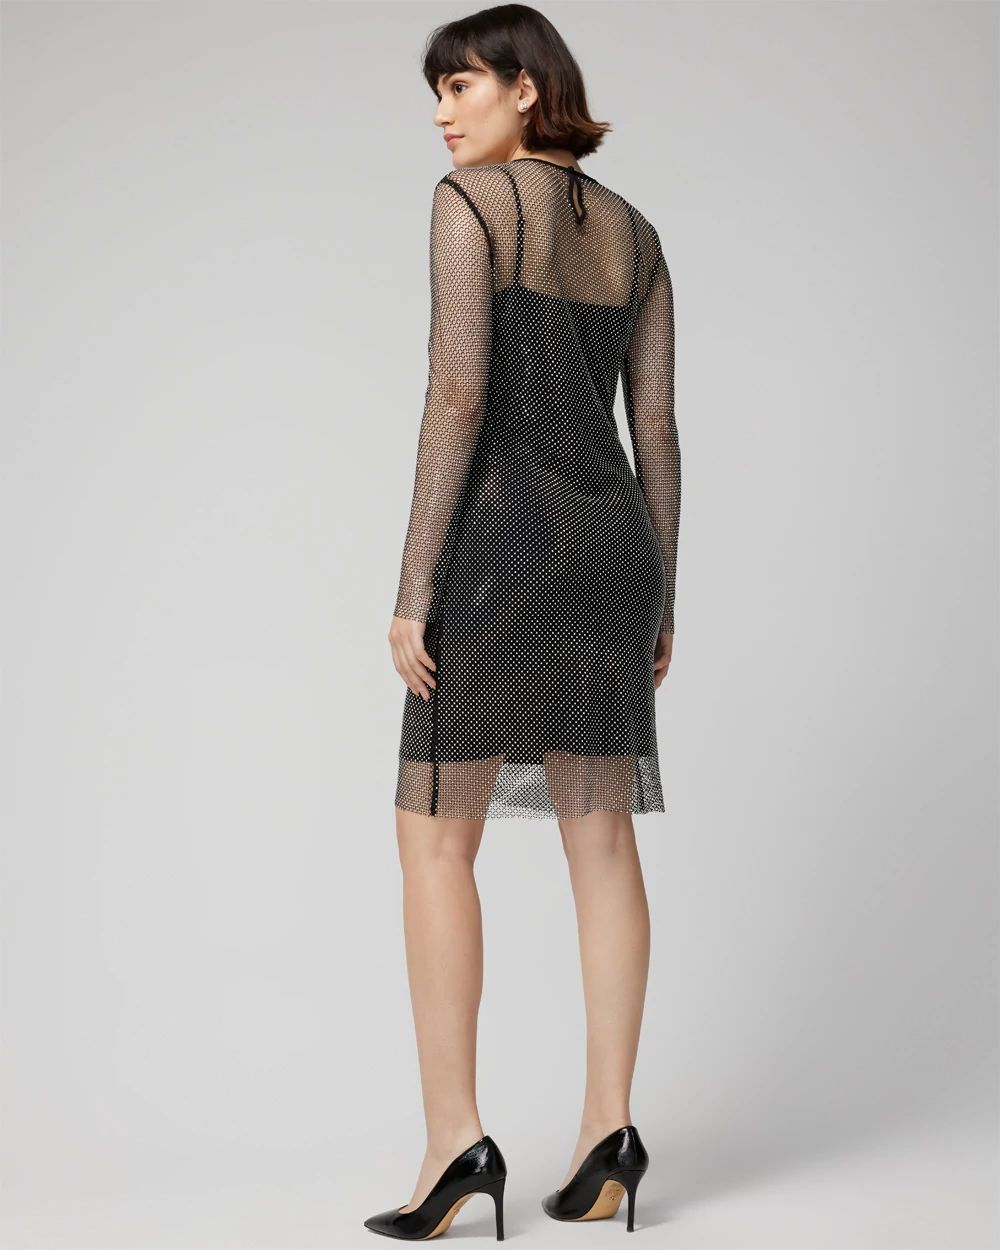 Long Sleeve Crystal Mesh Mini Dress click to view larger image.